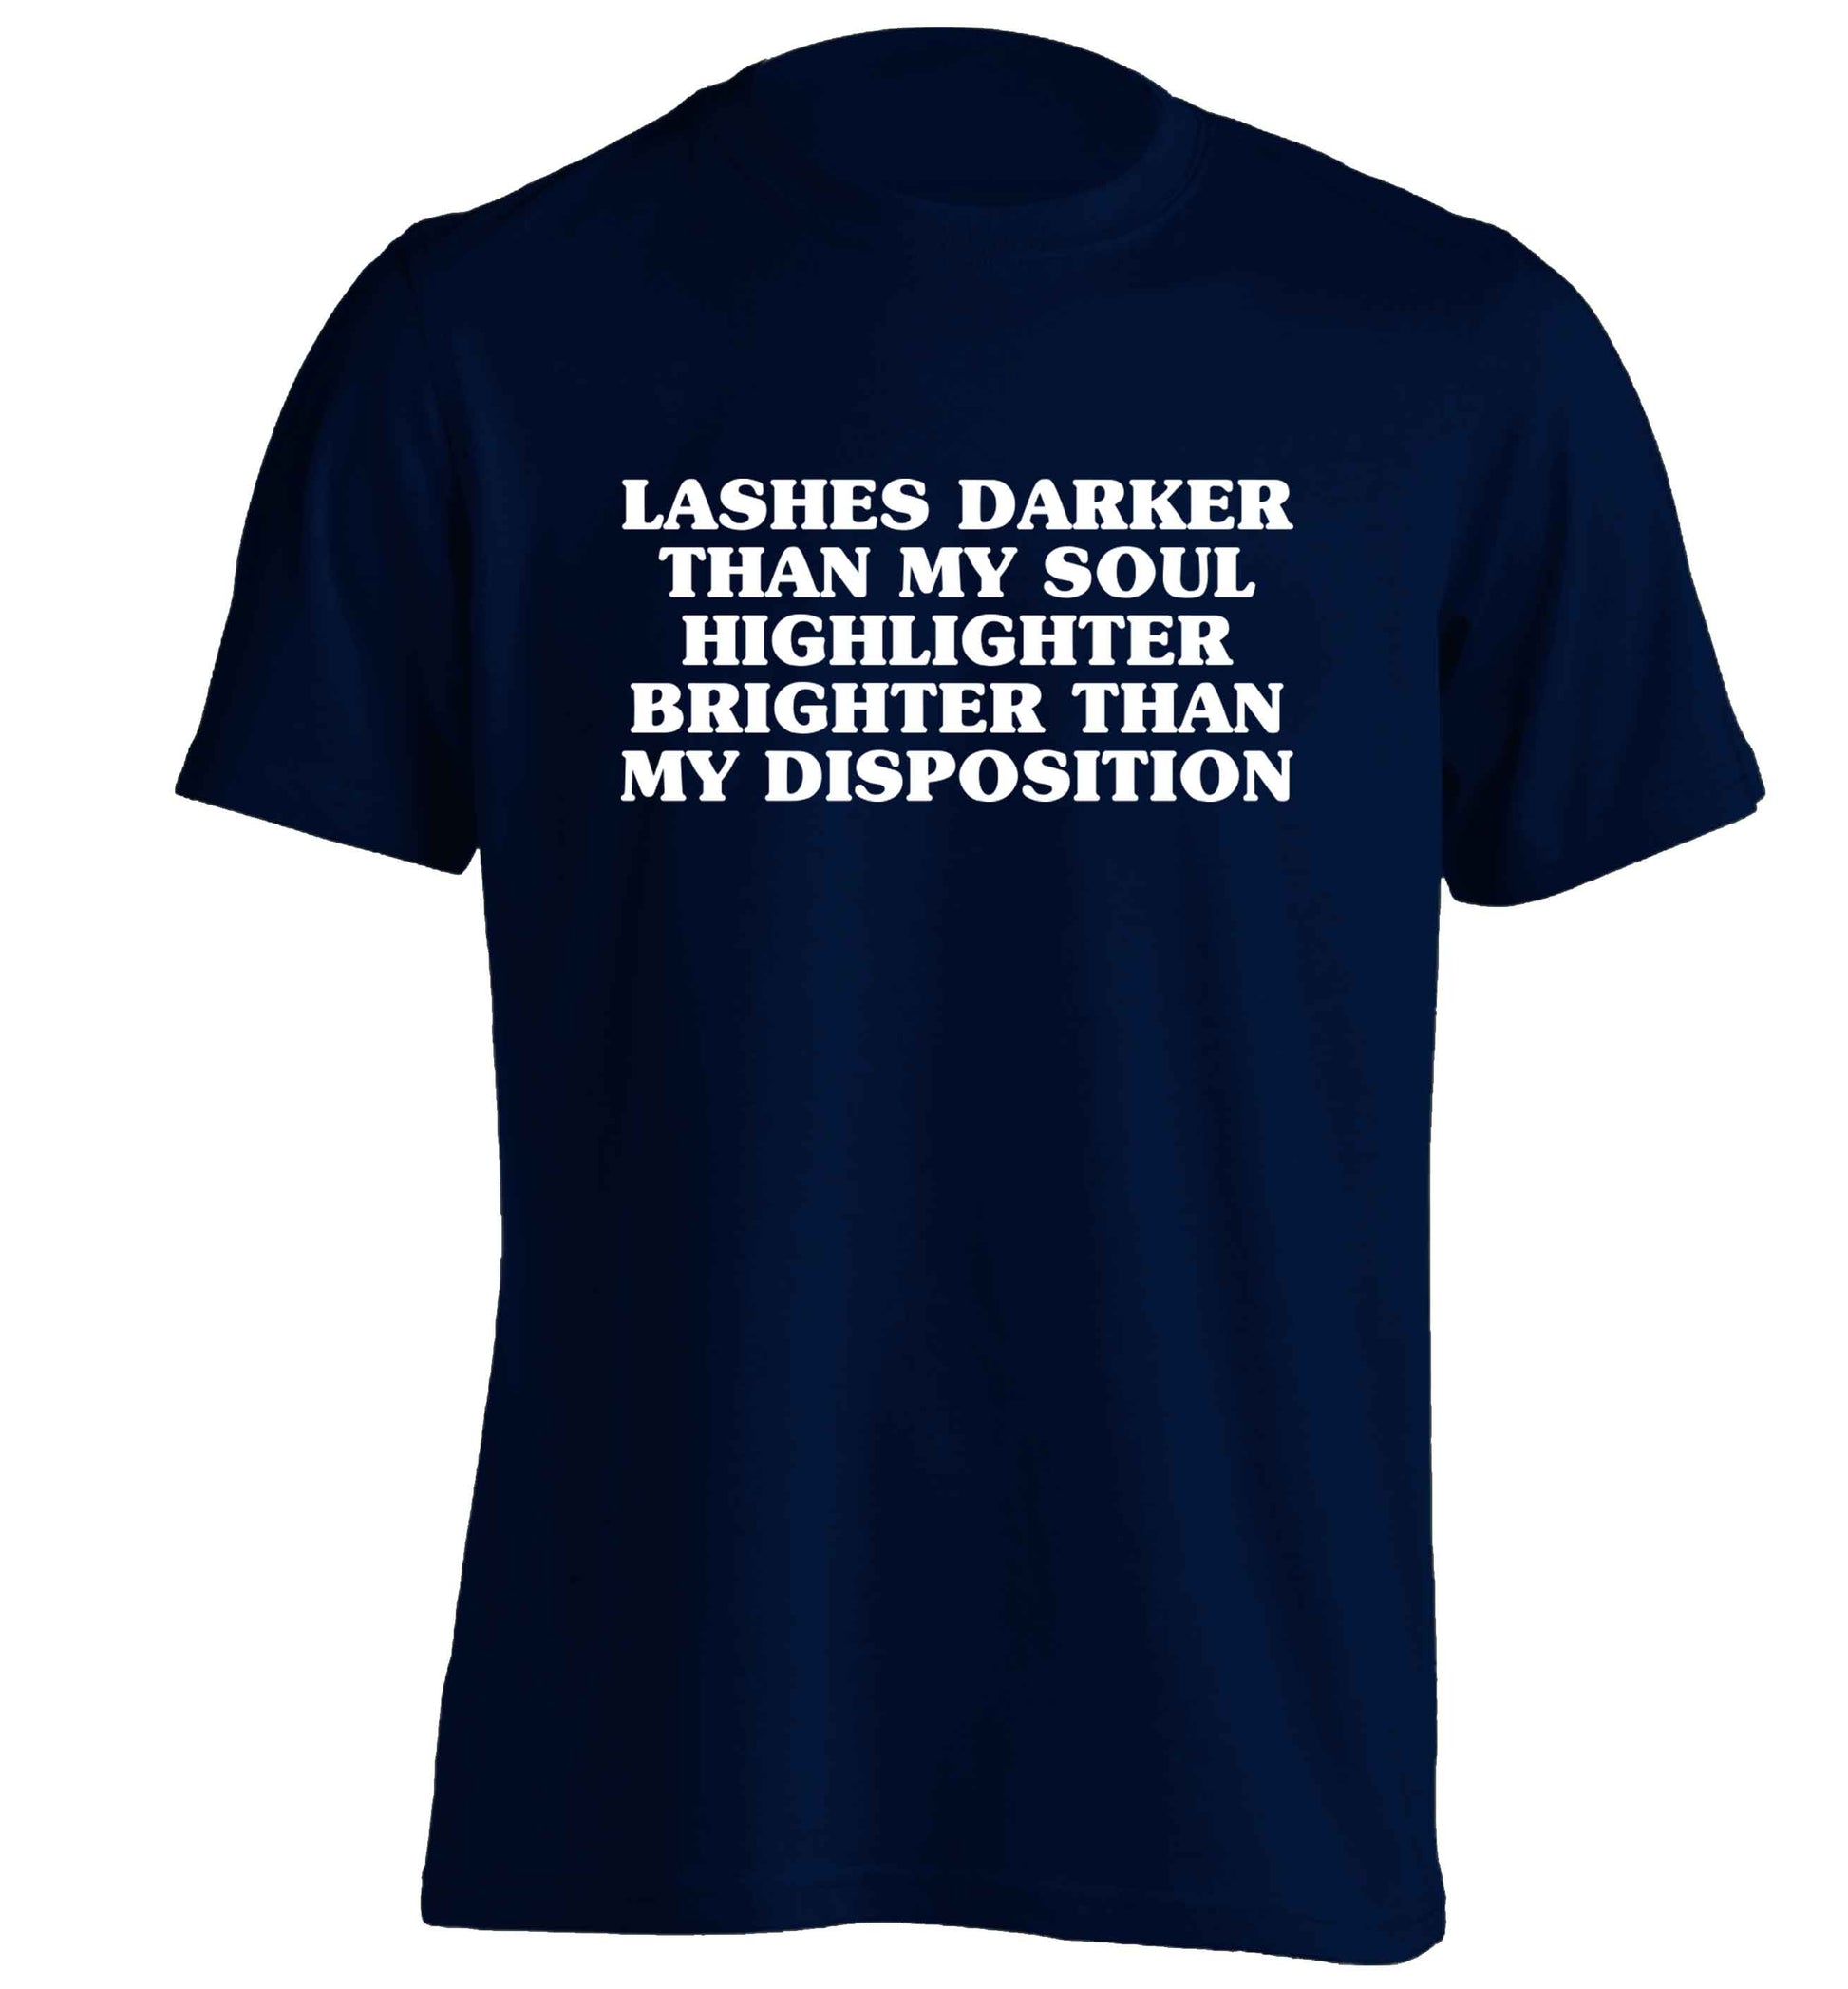 Lashes darker than my soul, highlighter brighter than my disposition adults unisex navy Tshirt 2XL